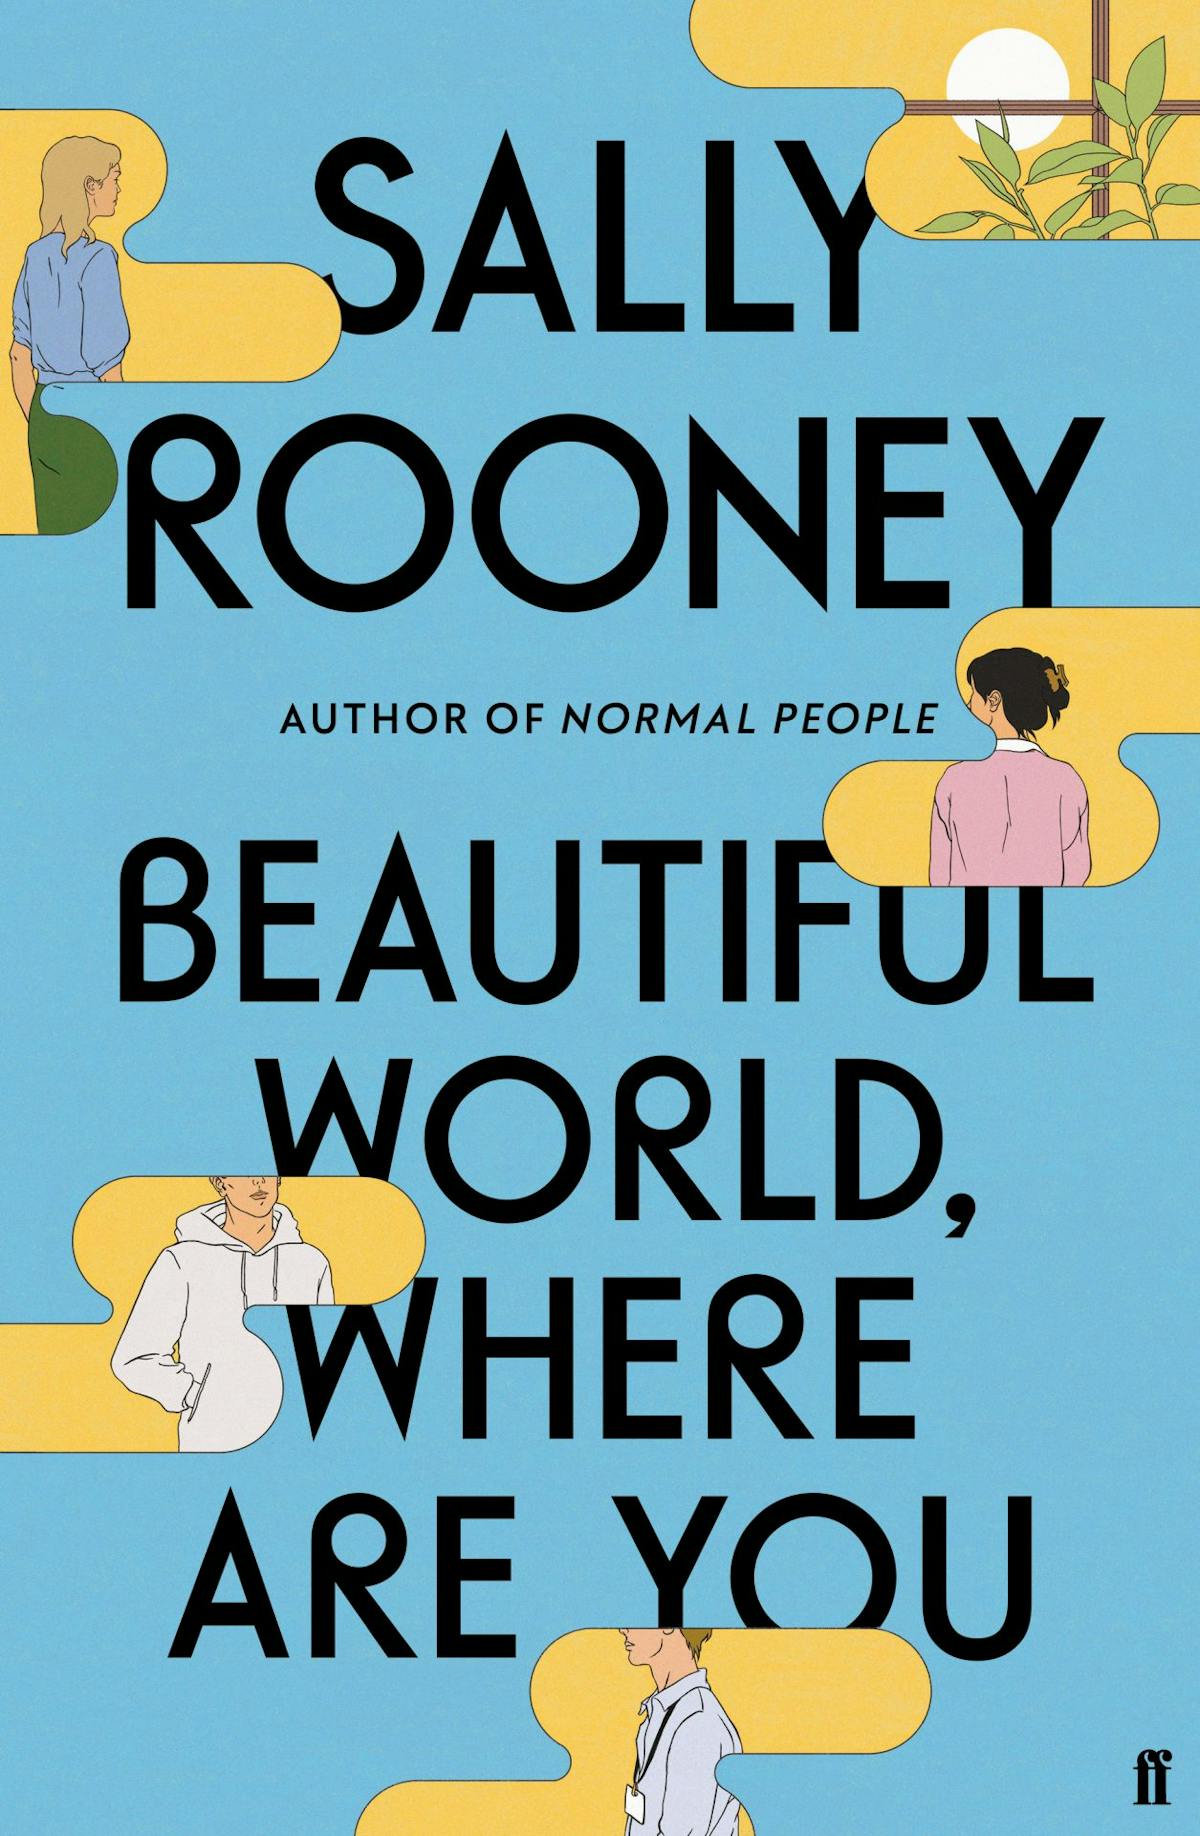 Sally Rooney's Beautiful World, Where Are You: release and plot